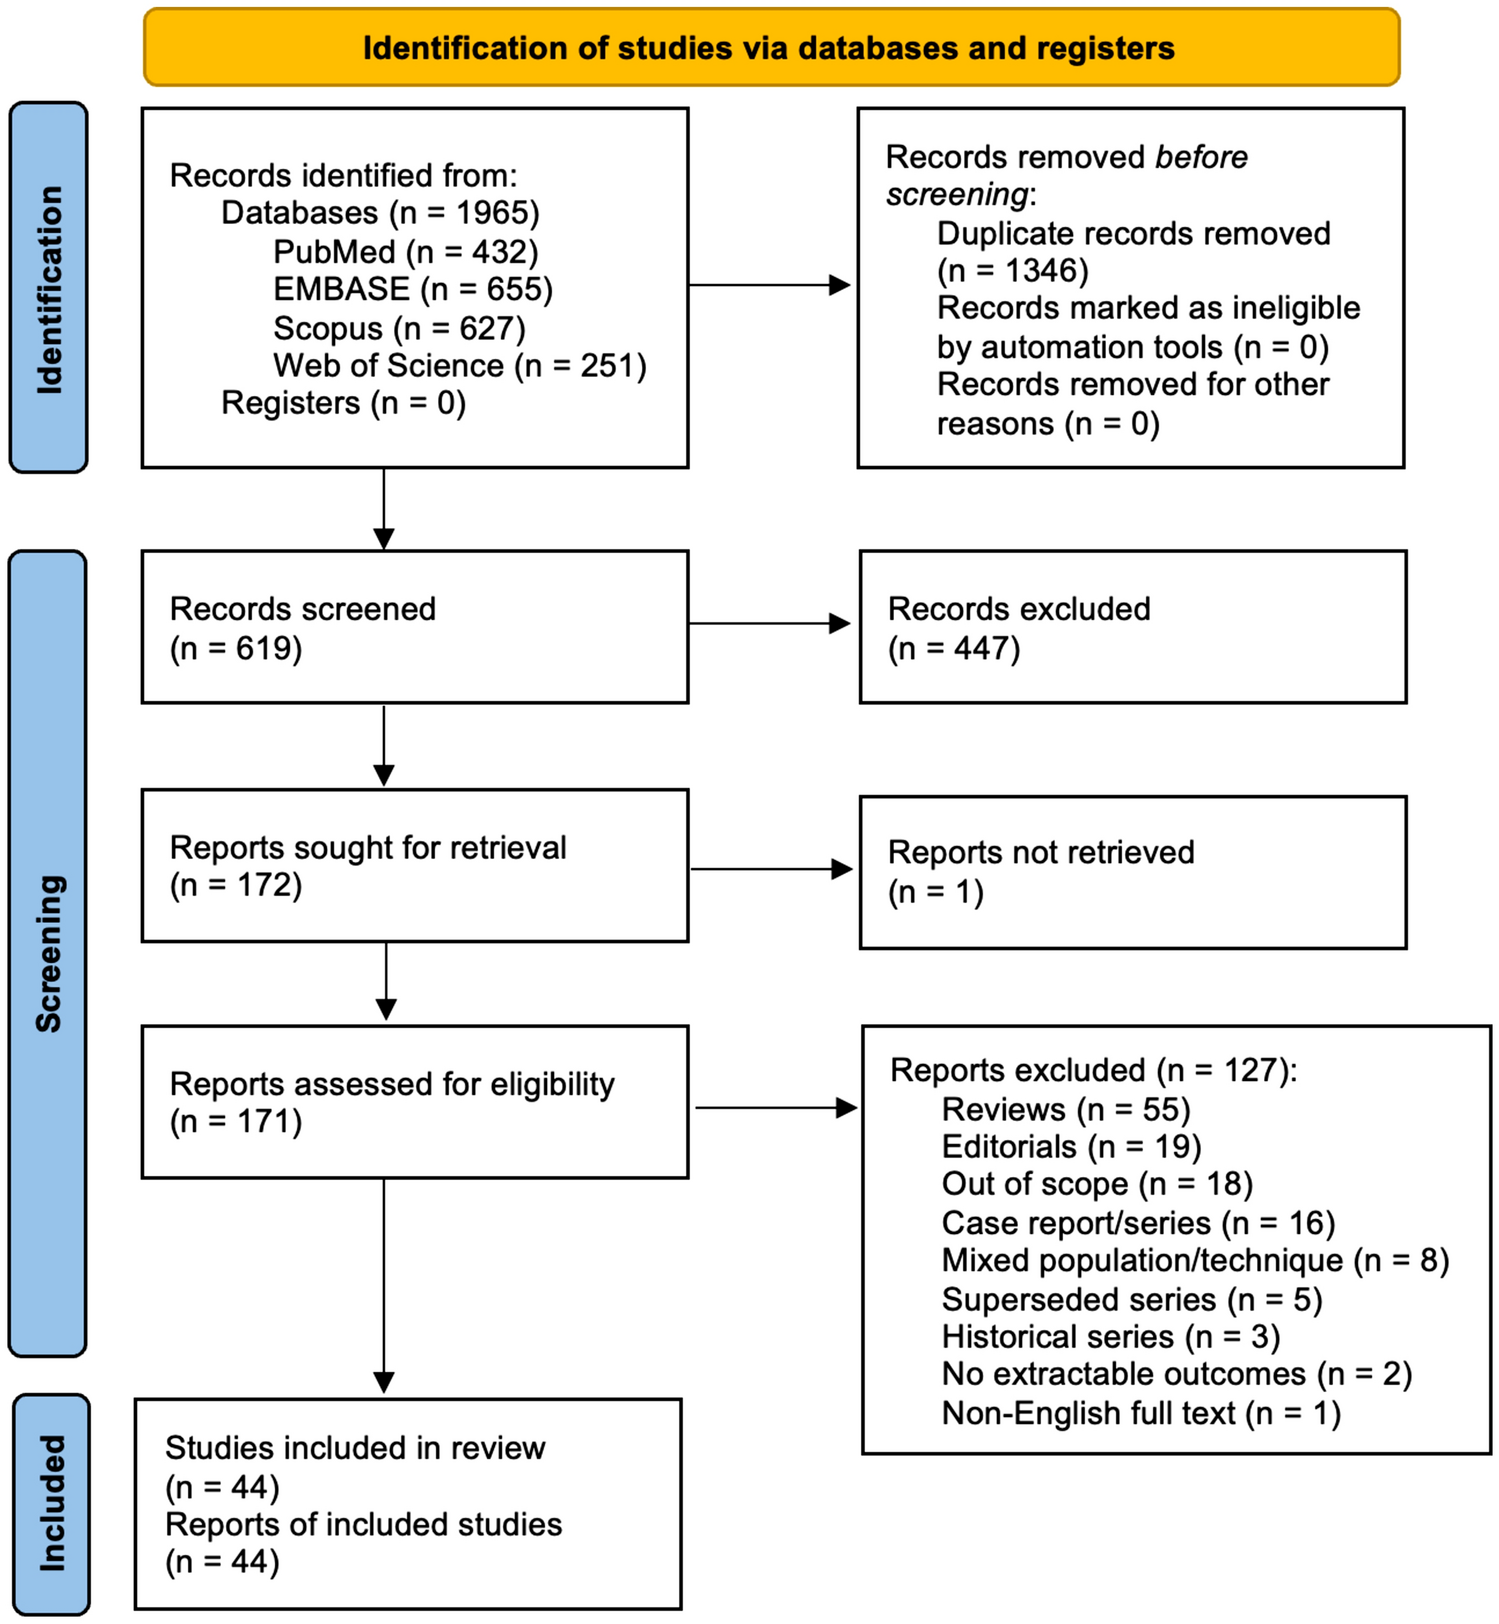 Sclerotherapy for hemorrhoidal disease: systematic review and meta-analysis